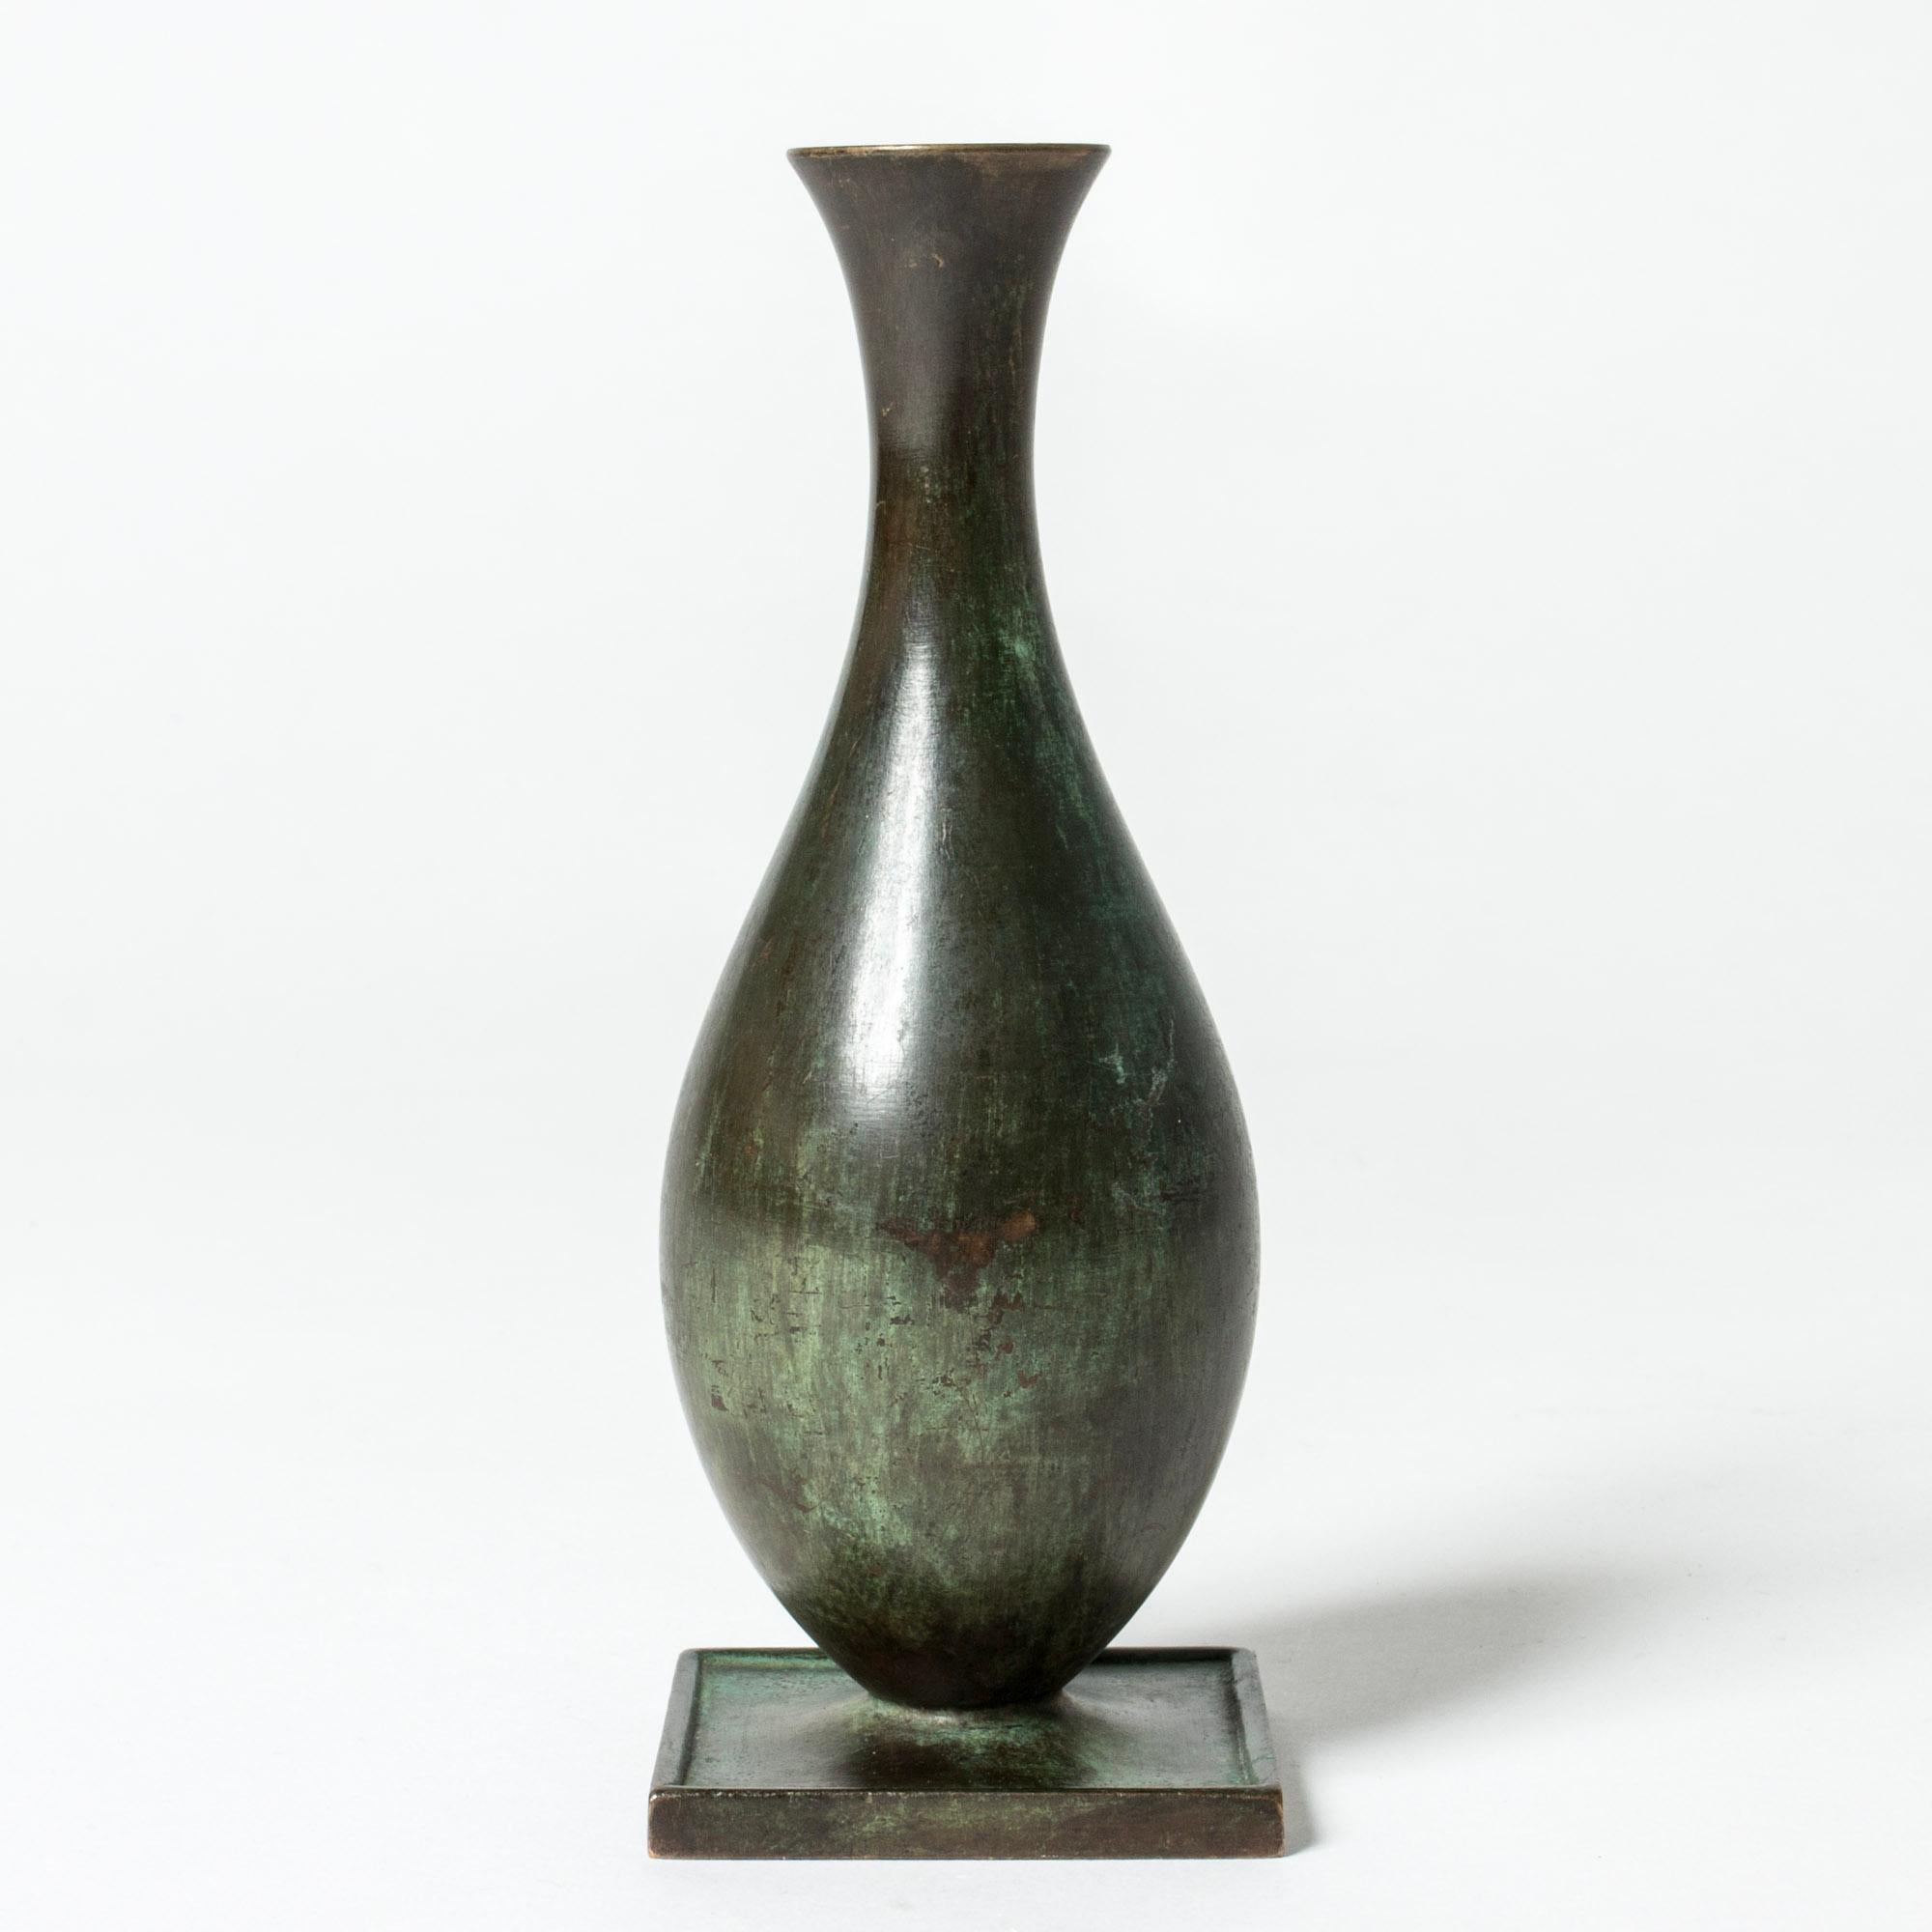 Lovley bronze vase from GAB, patinated dark green in varying nuances. Classic shape with a wide square base.

GAB was founded in Stockholm in 1867 and was an important influence on the Swedish art and crafts and industrial design scenes for more